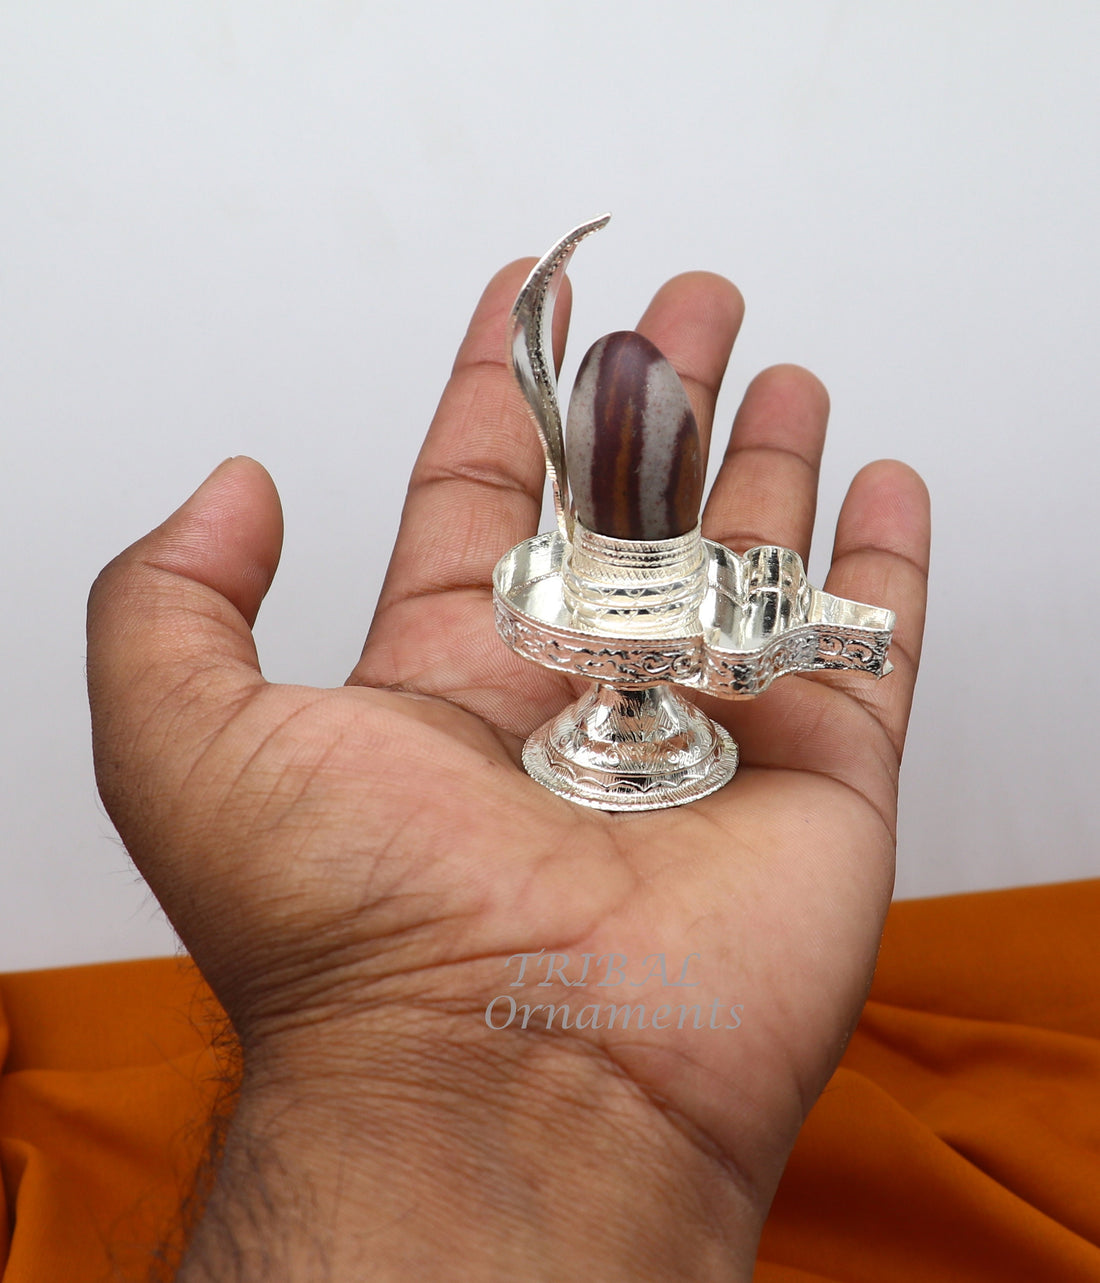 925 Sterling silver Lord Shiva Lingam stand/ Jalheri, use for put/hold Shiva Lingam handmade puja article su966 - TRIBAL ORNAMENTS